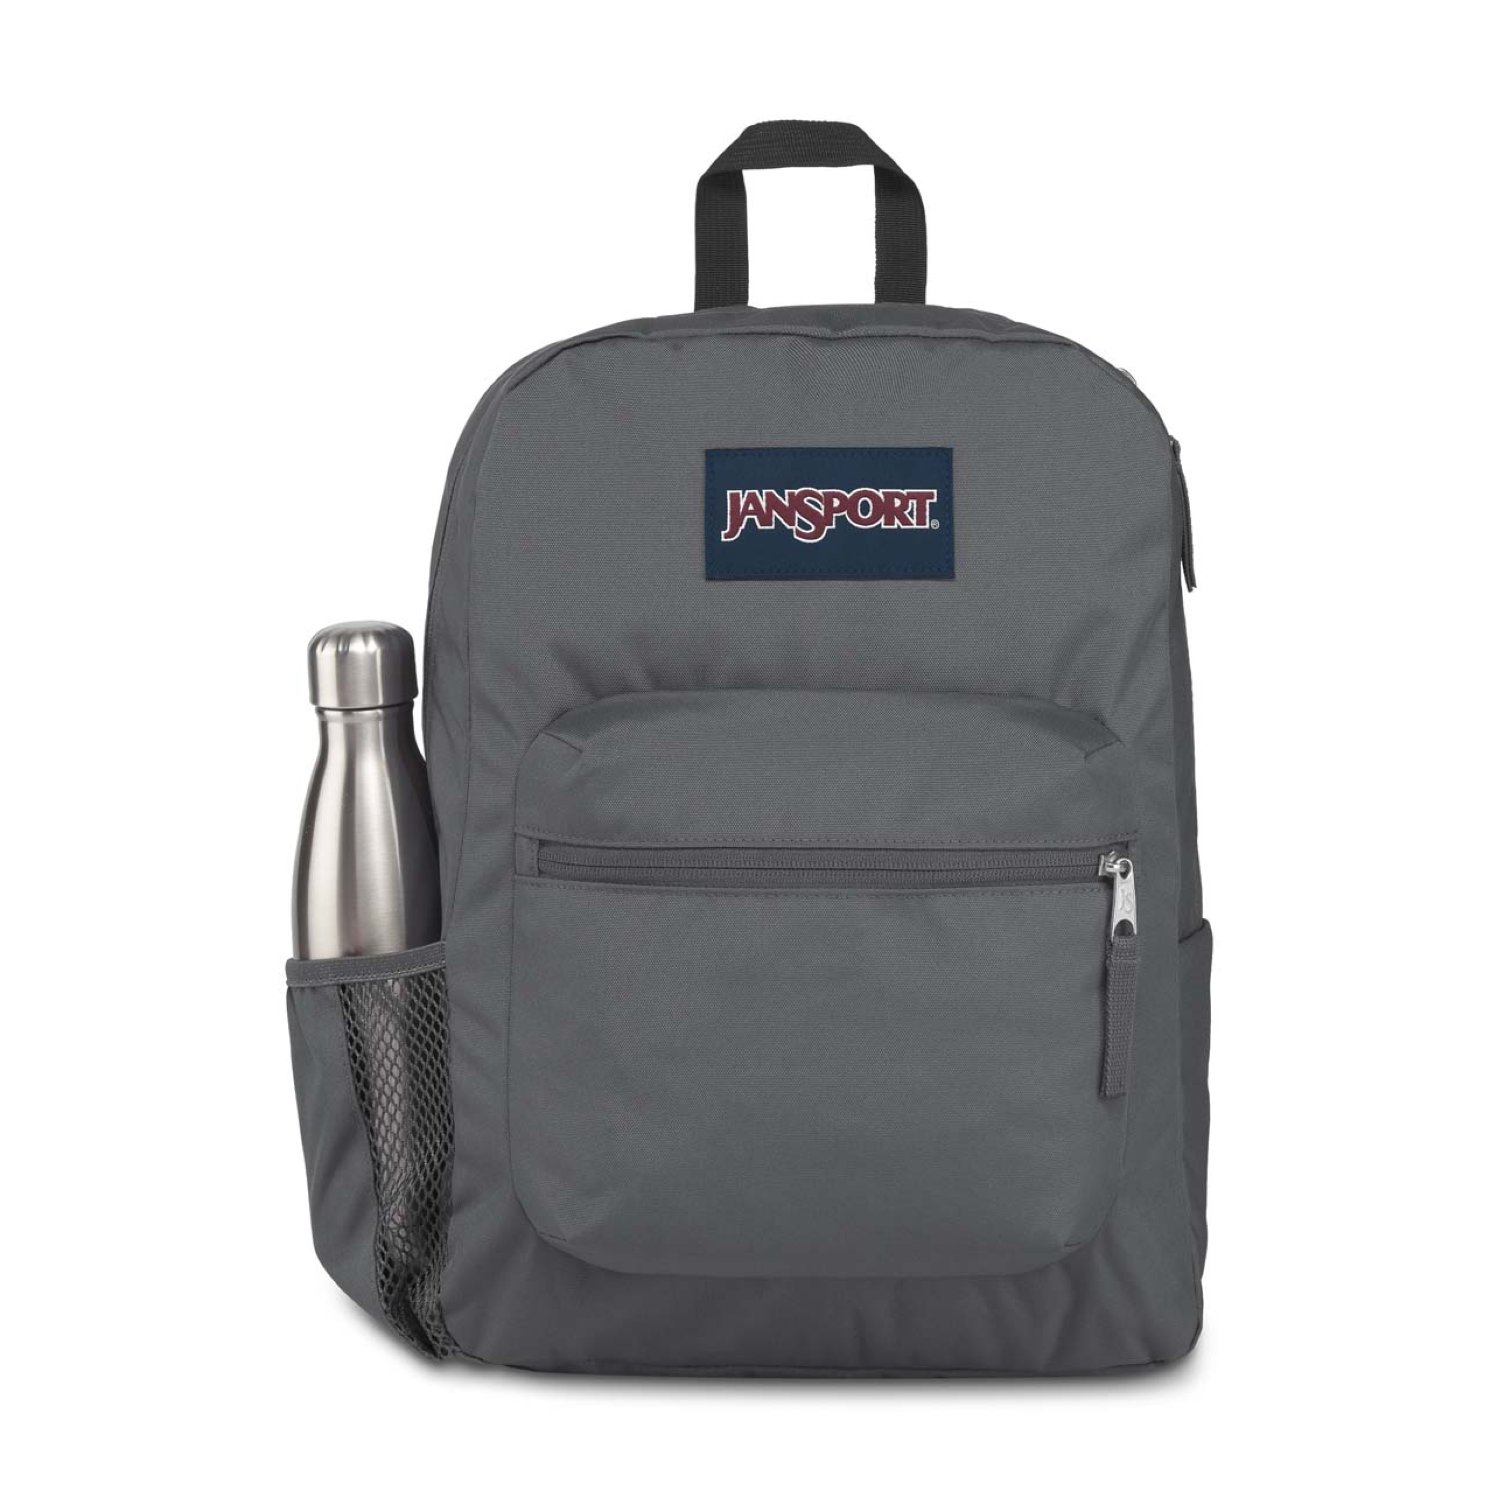 Buy Jansport Cross Town Backpack - Deep Grey in Singapore & Malaysia - The Planet Traveller